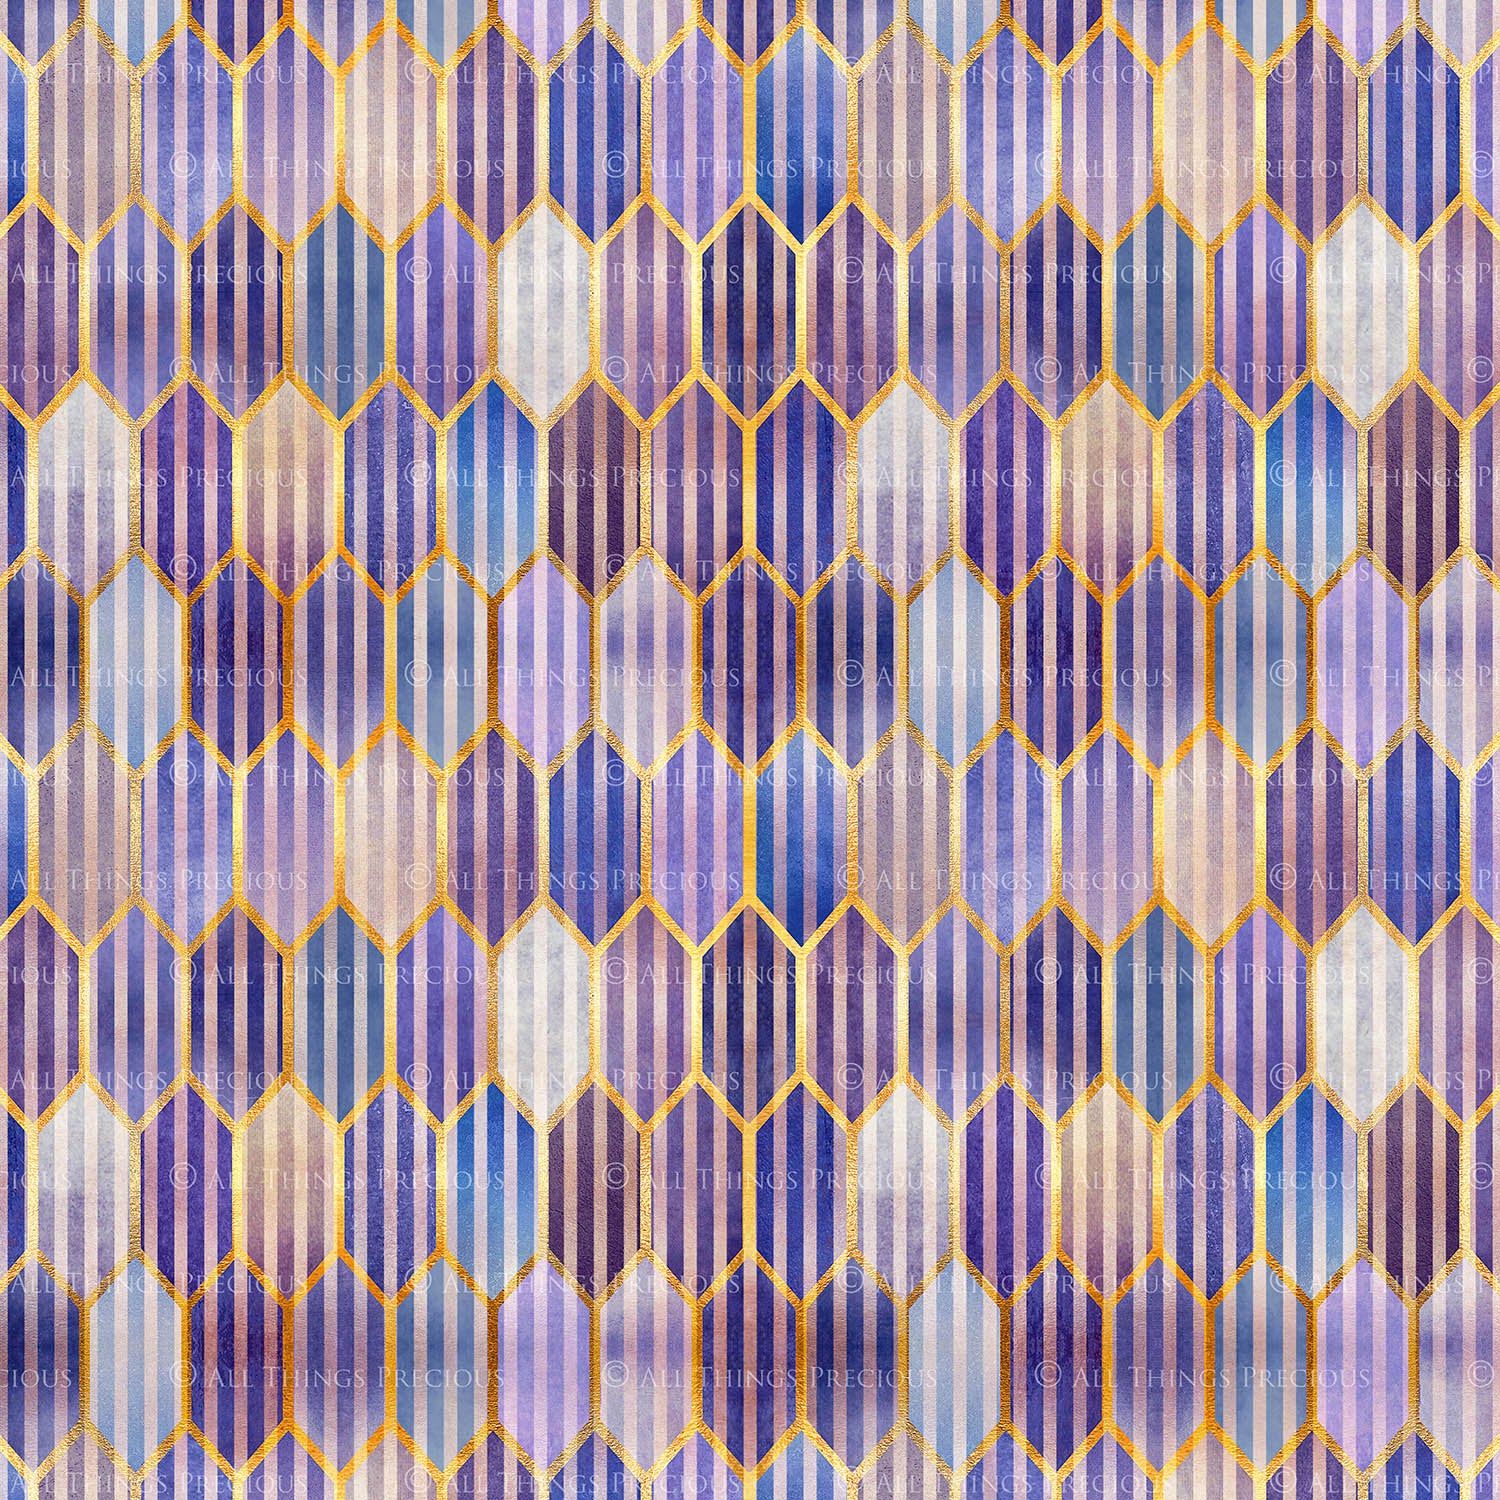 TEXTURED PATTERN Gold & Purple - Digital Papers